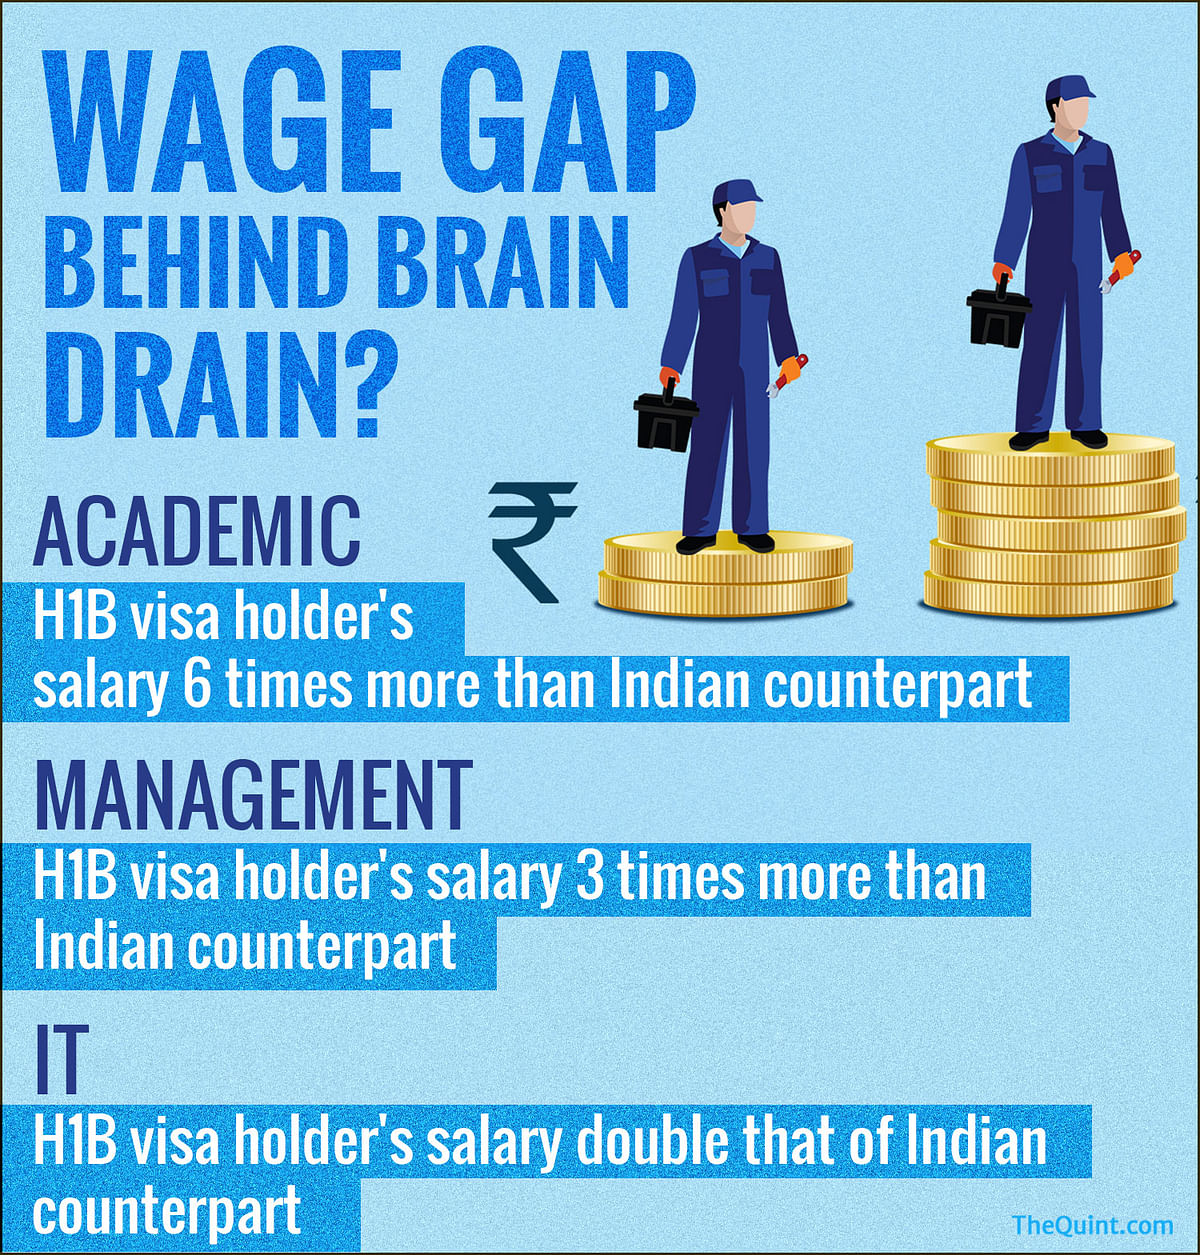 The slow pace of job creation will hamper India’s efforts to stem brain drain.